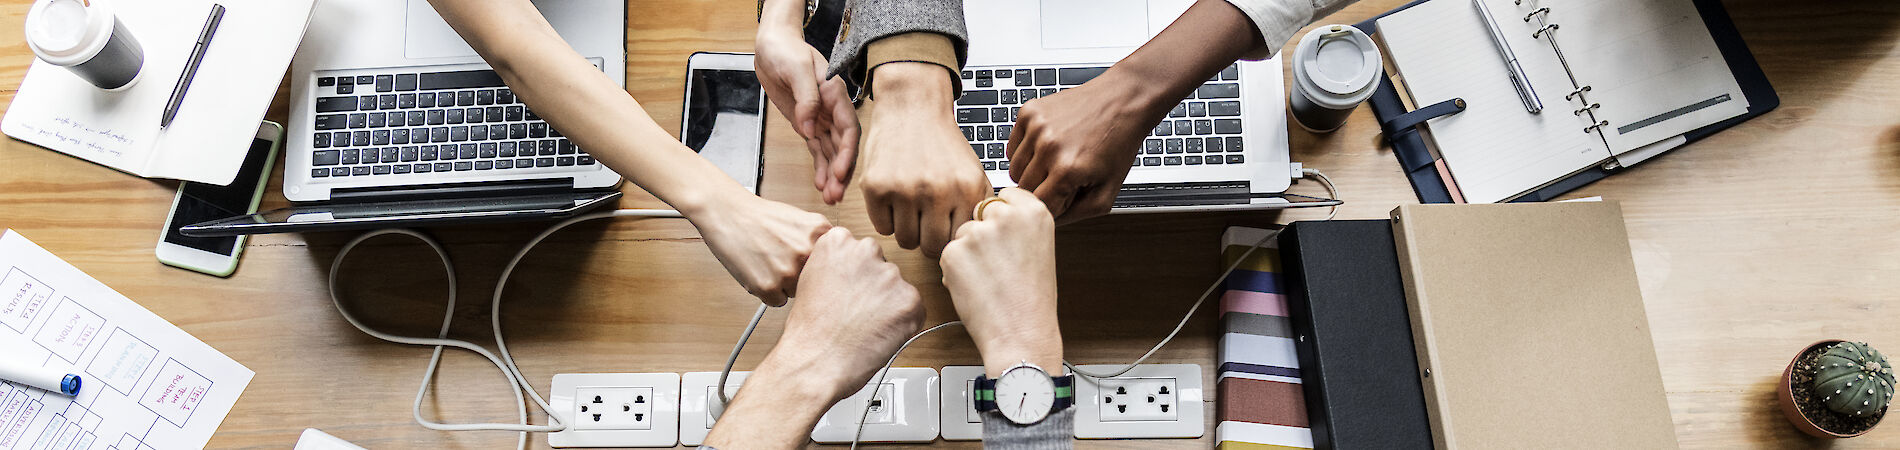 Five hands giving fistbumps in the middle of a table with laptops and stationary